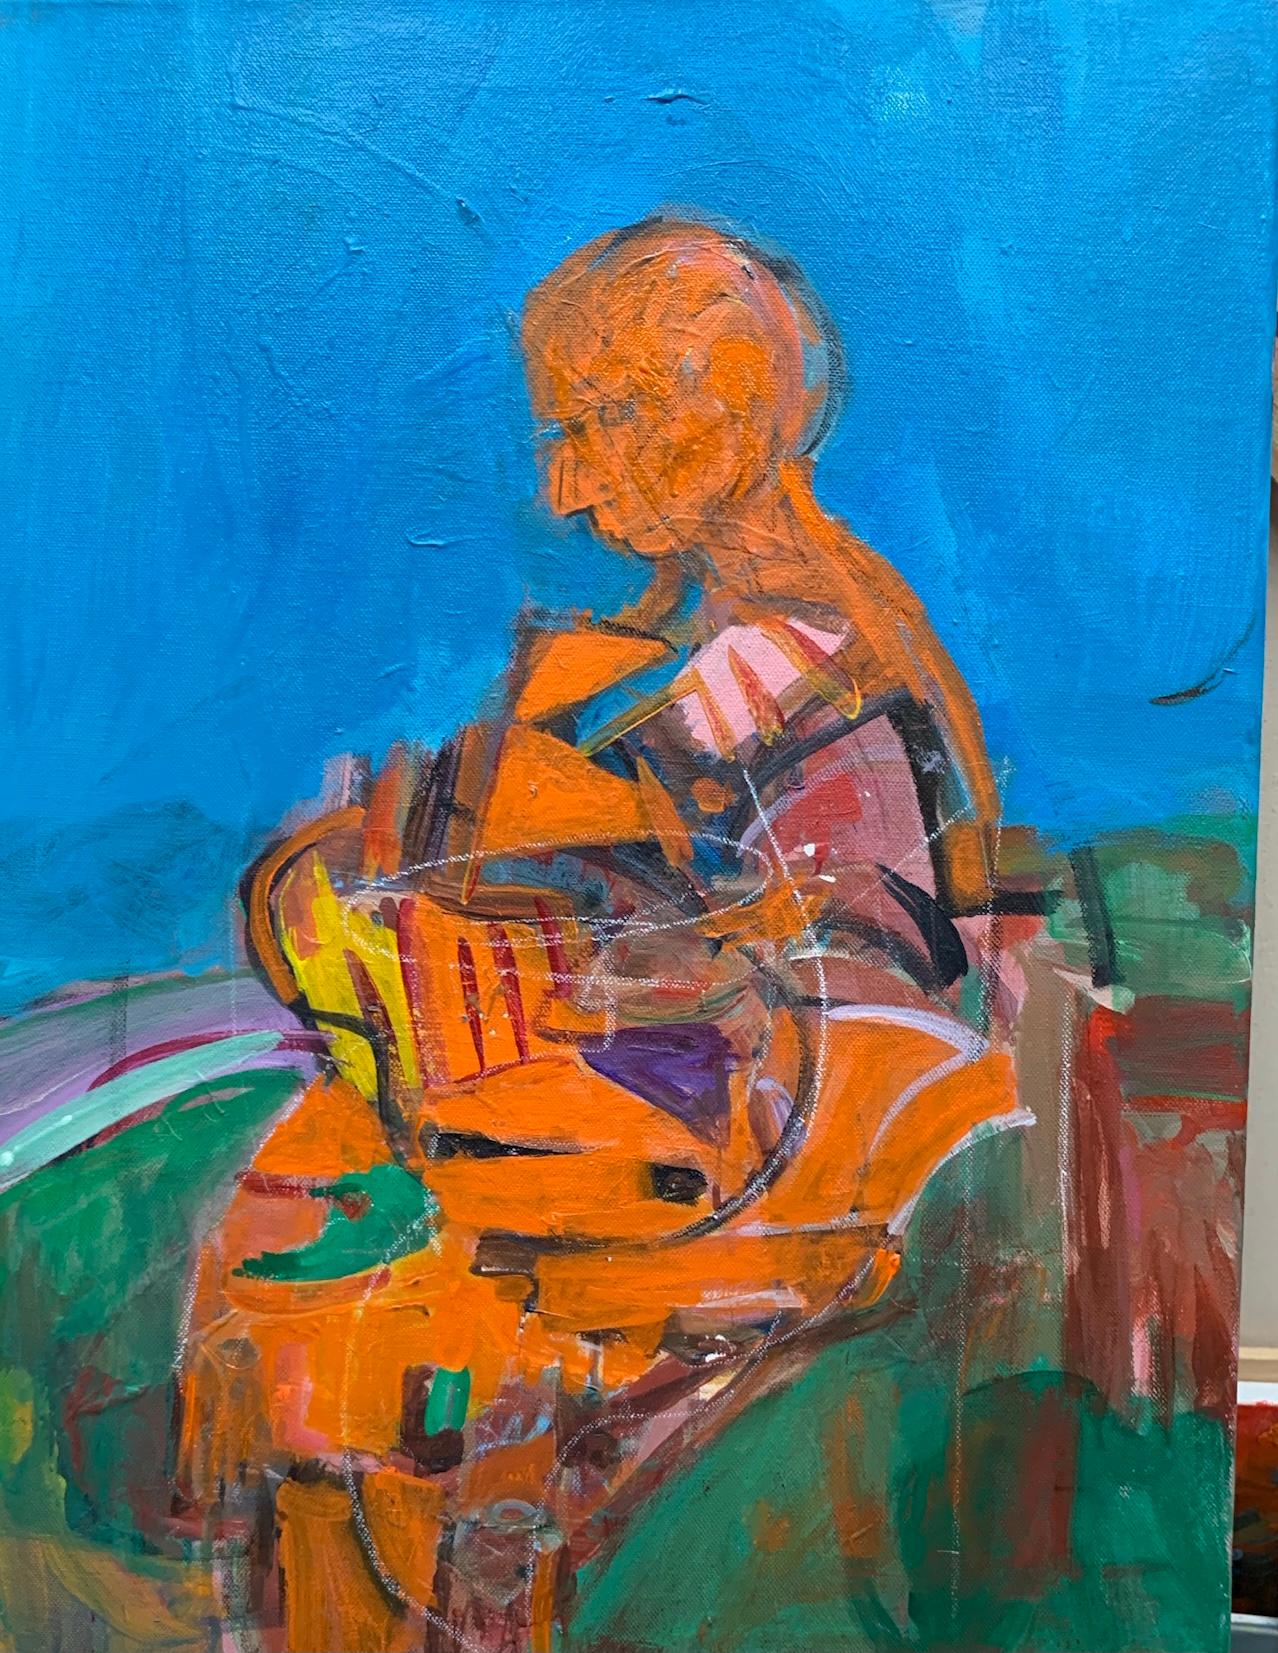 Frank Shifreen
Roadside Figure in Orange
2021
18 x 24 inches 
Acrylic on Canvas
Signed, titled and dated on verso

These new works start from polar opposite impulses which juxtapose the purity and beauty of platonic forms opposed to impulsive